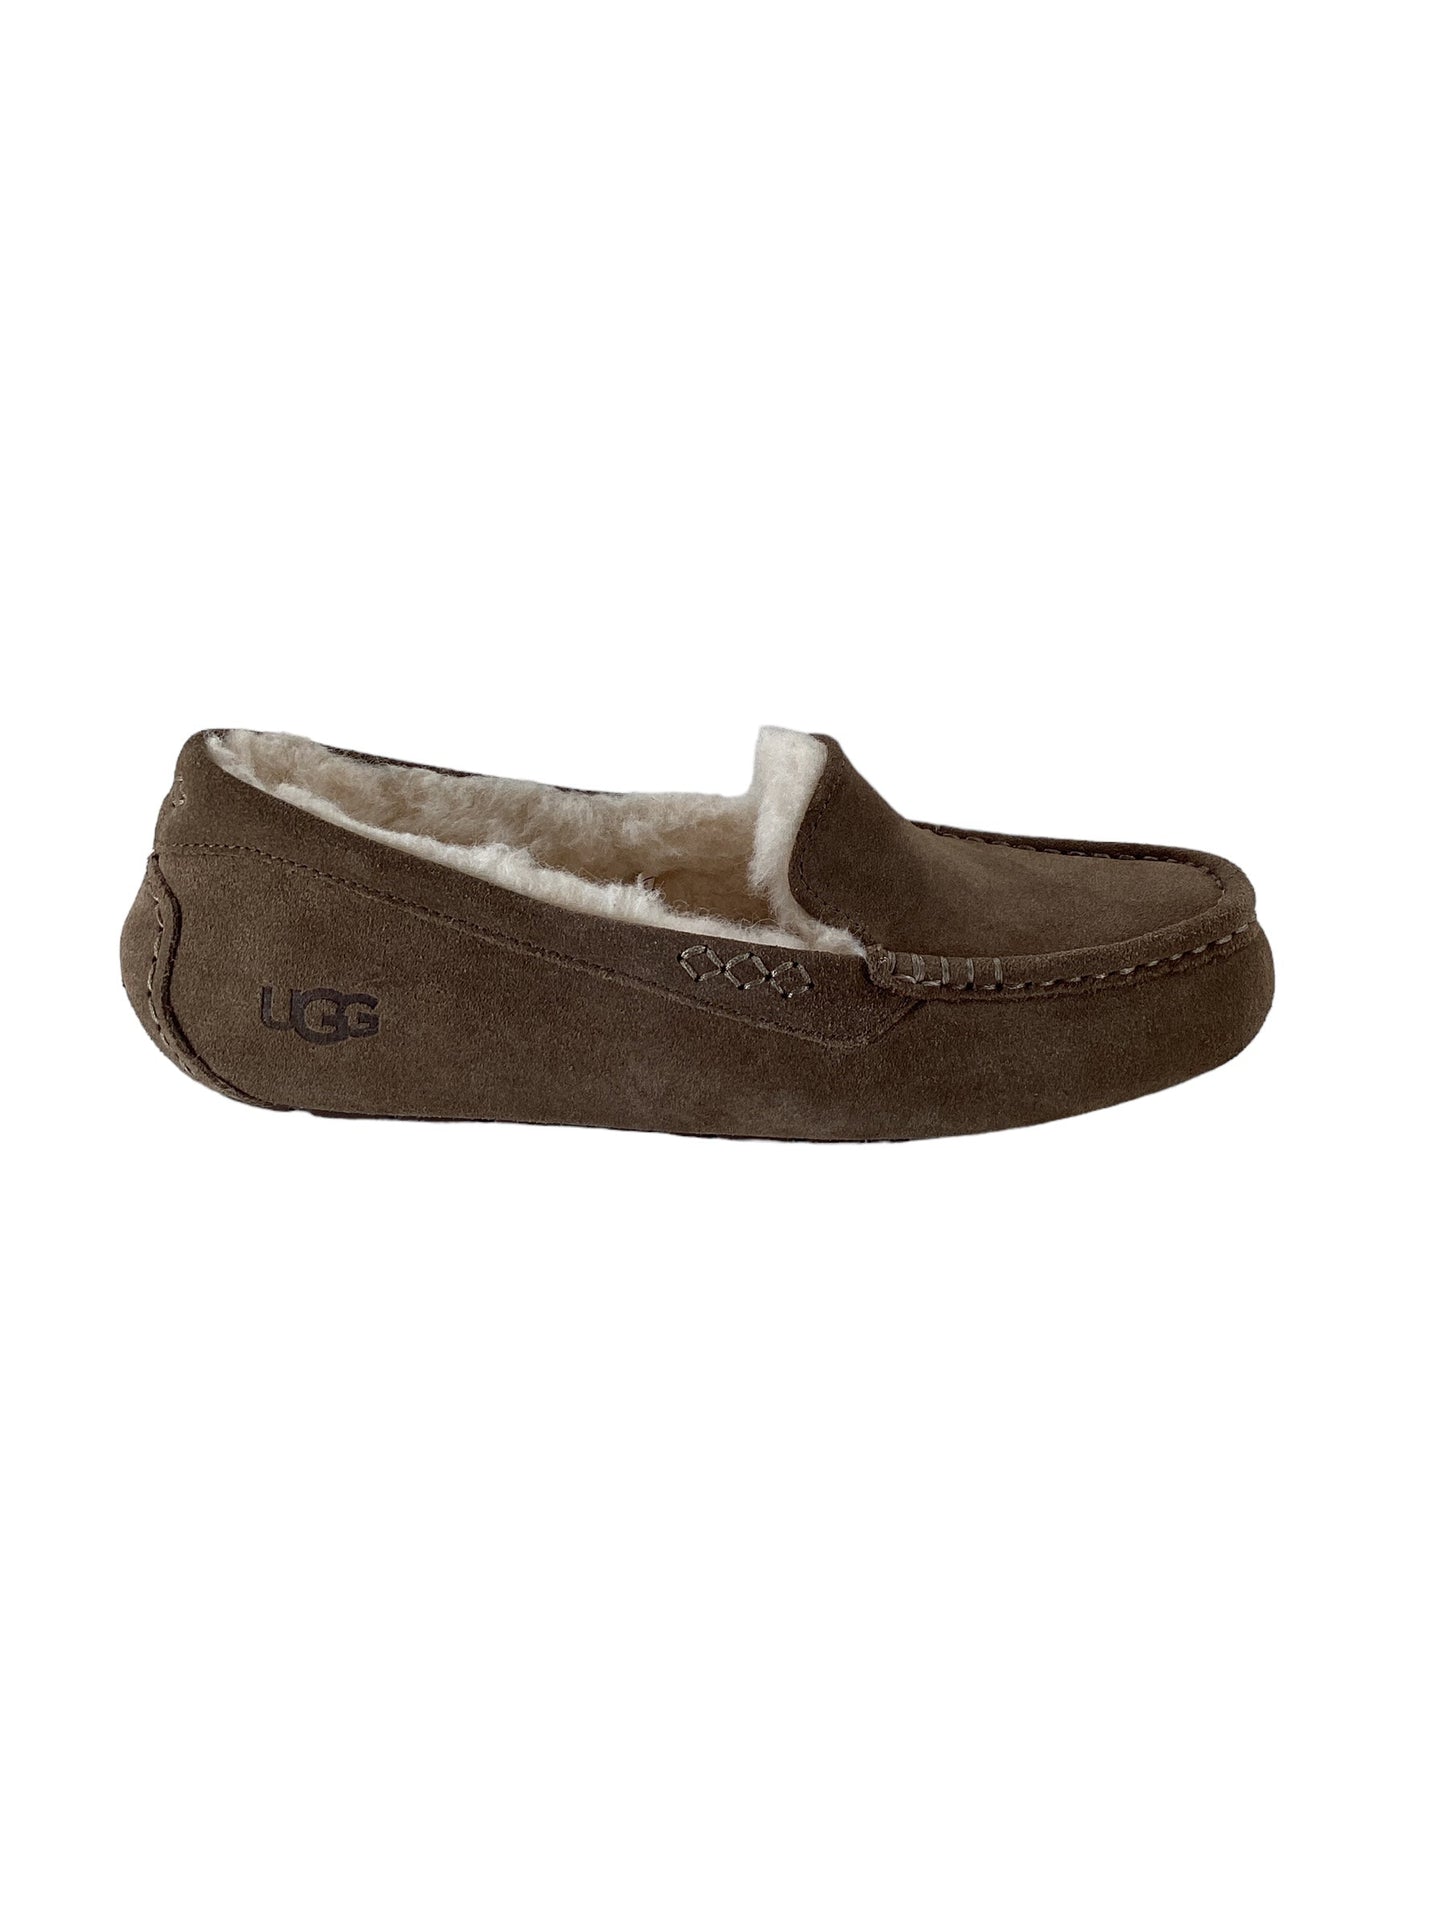 Brown Shoes Flats Ugg, Size 10